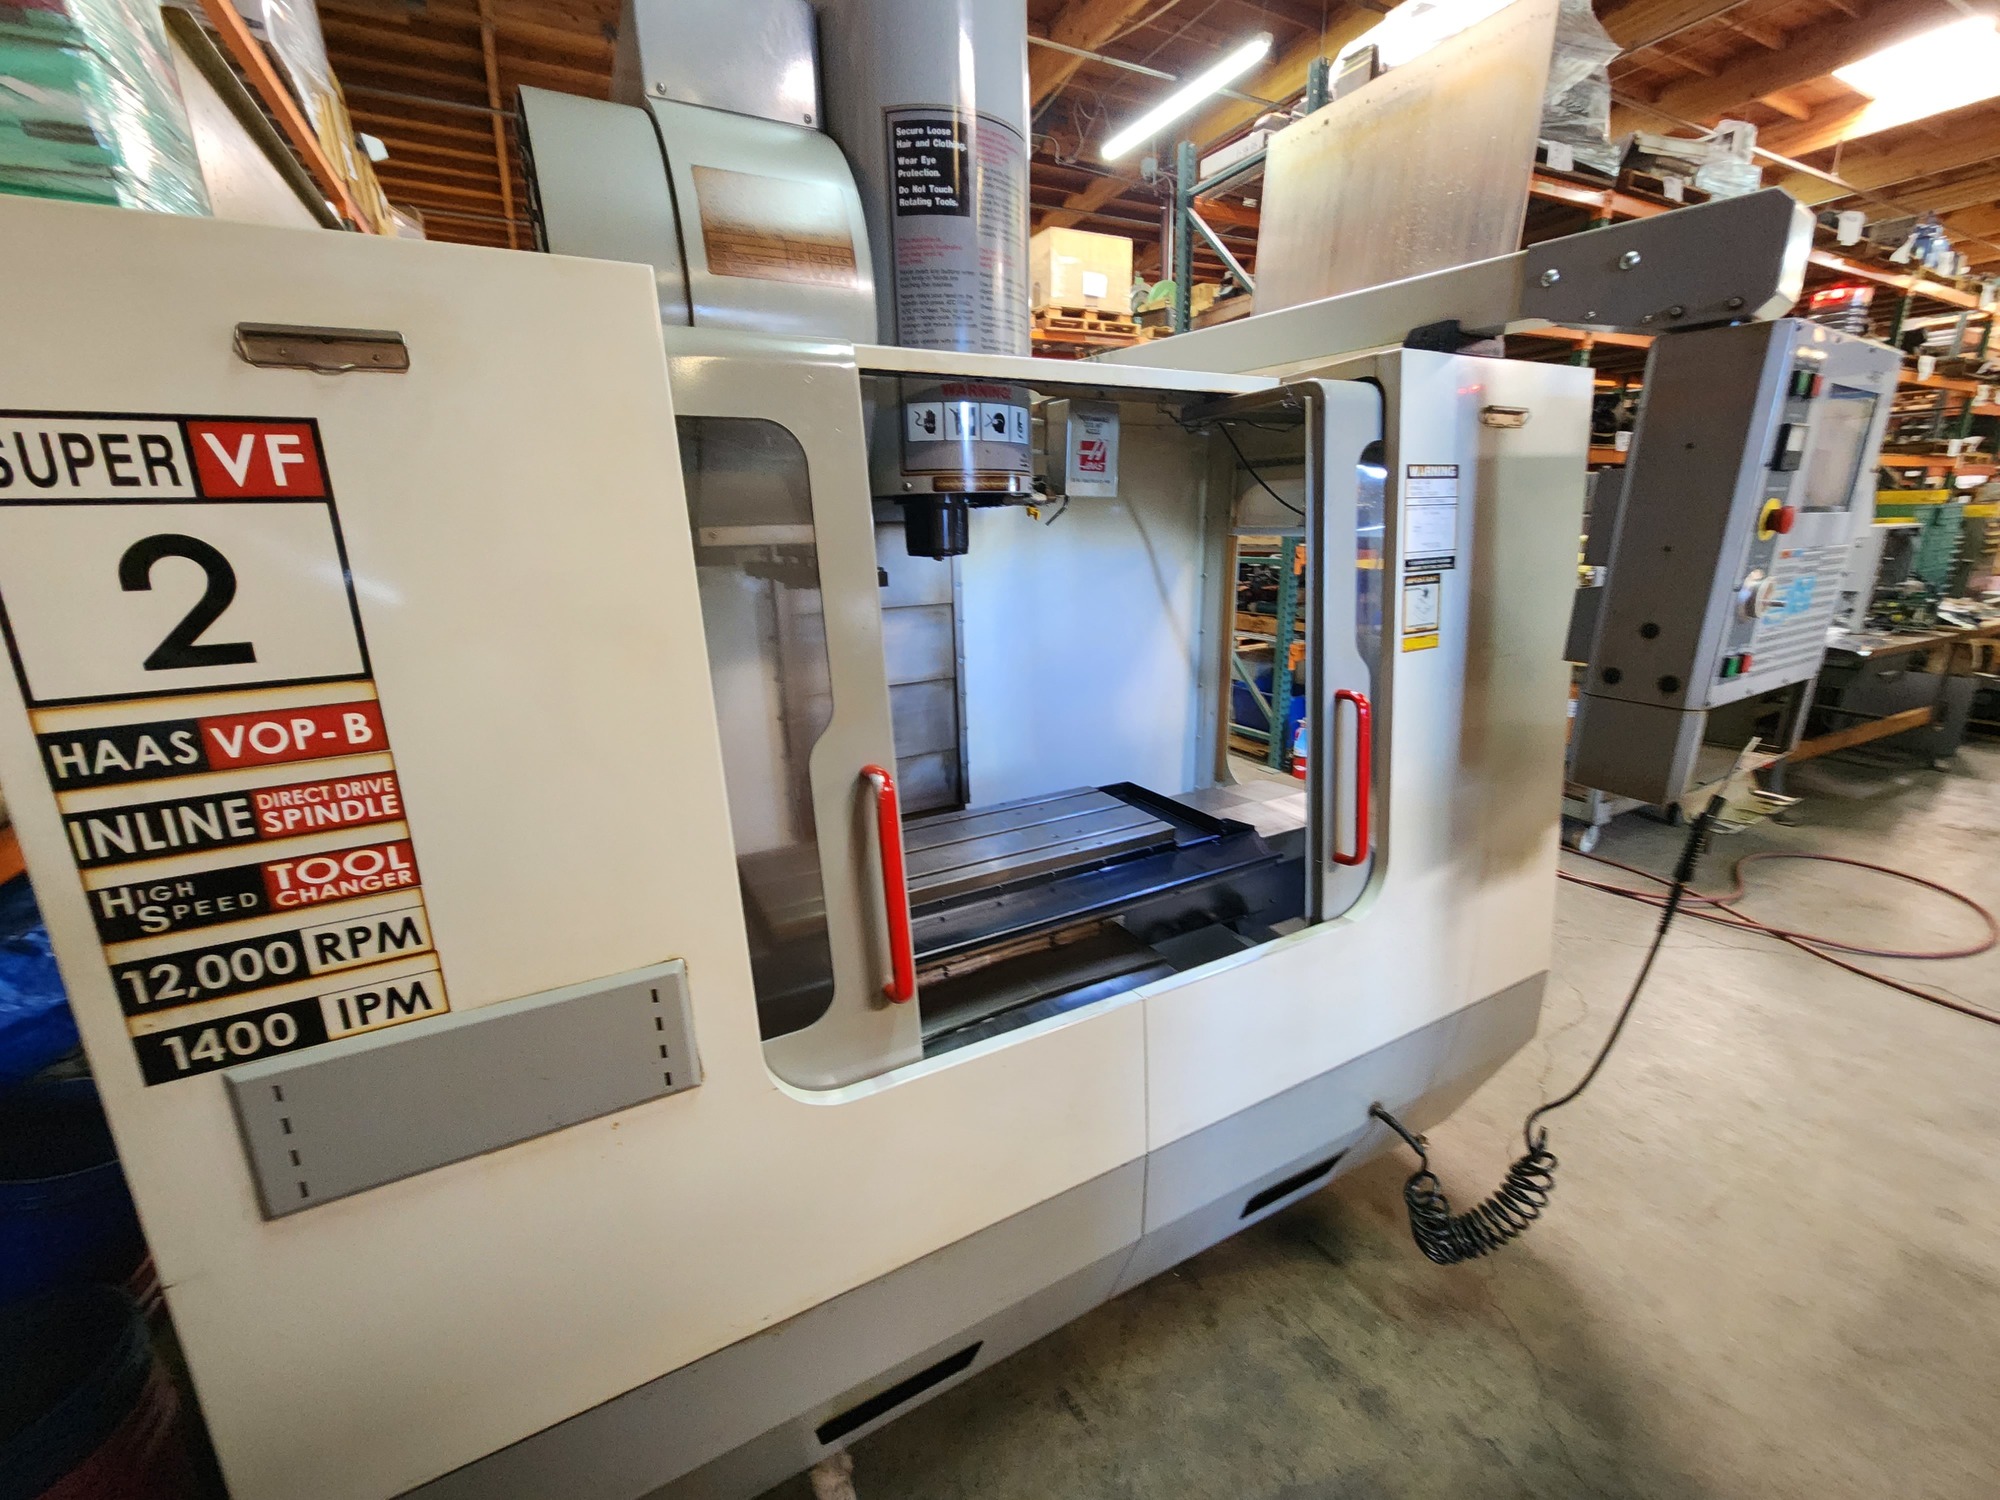 2003 HAAS VF-2SS Vertical Machining Centers | SMS Engineering